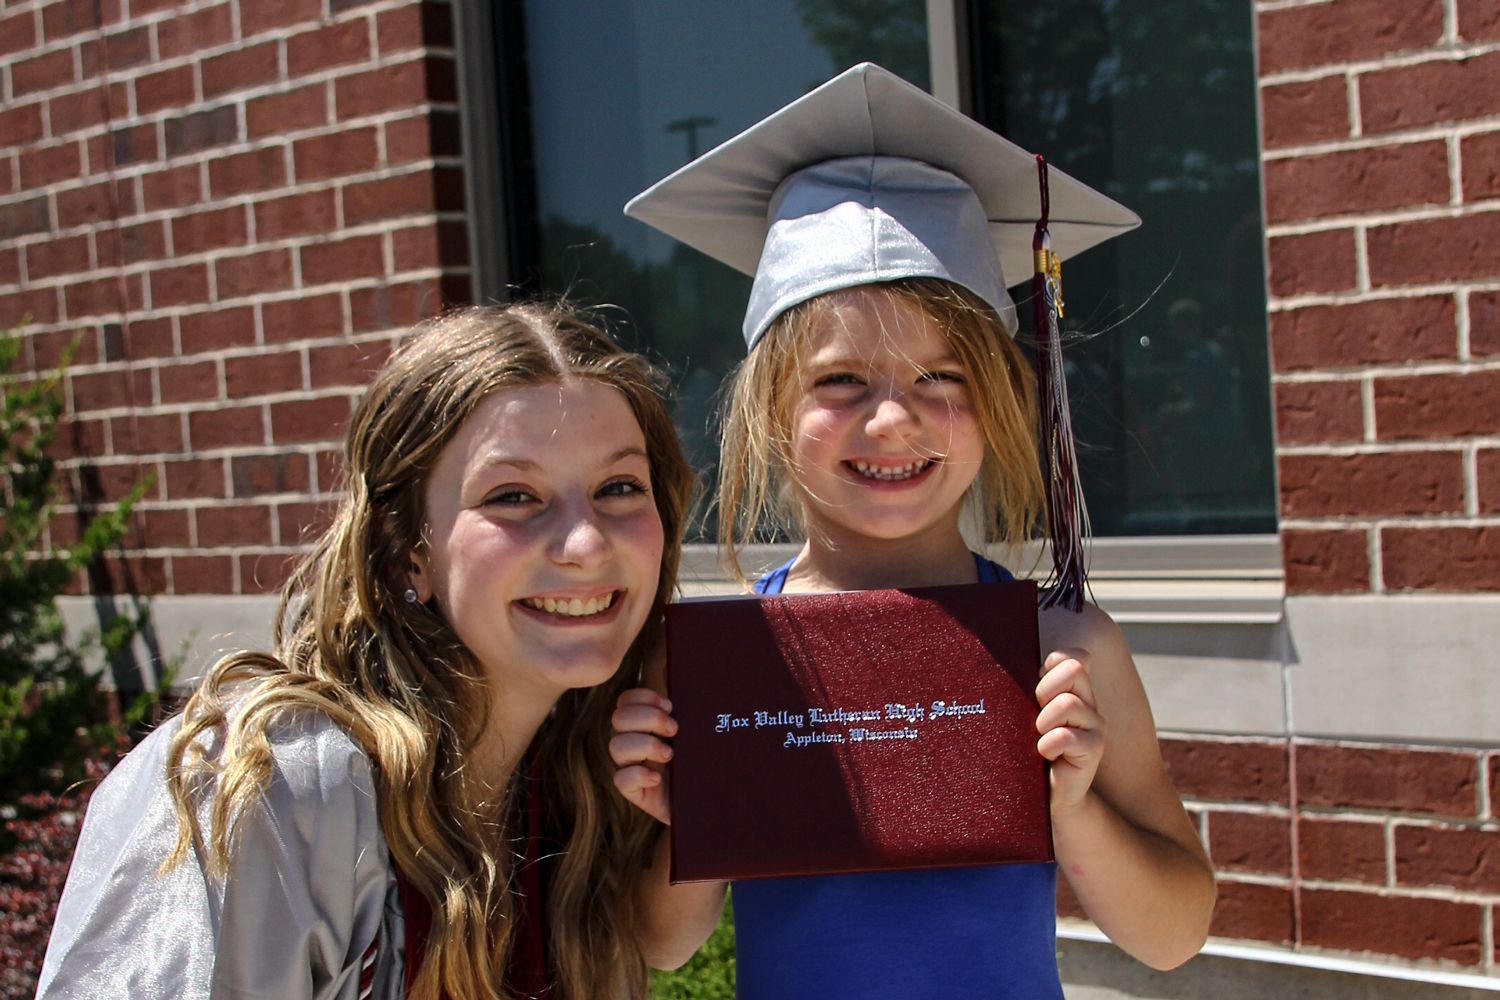 Little girl wearing the cap and holding the diploma of the female graduate who is smiling and is next to her